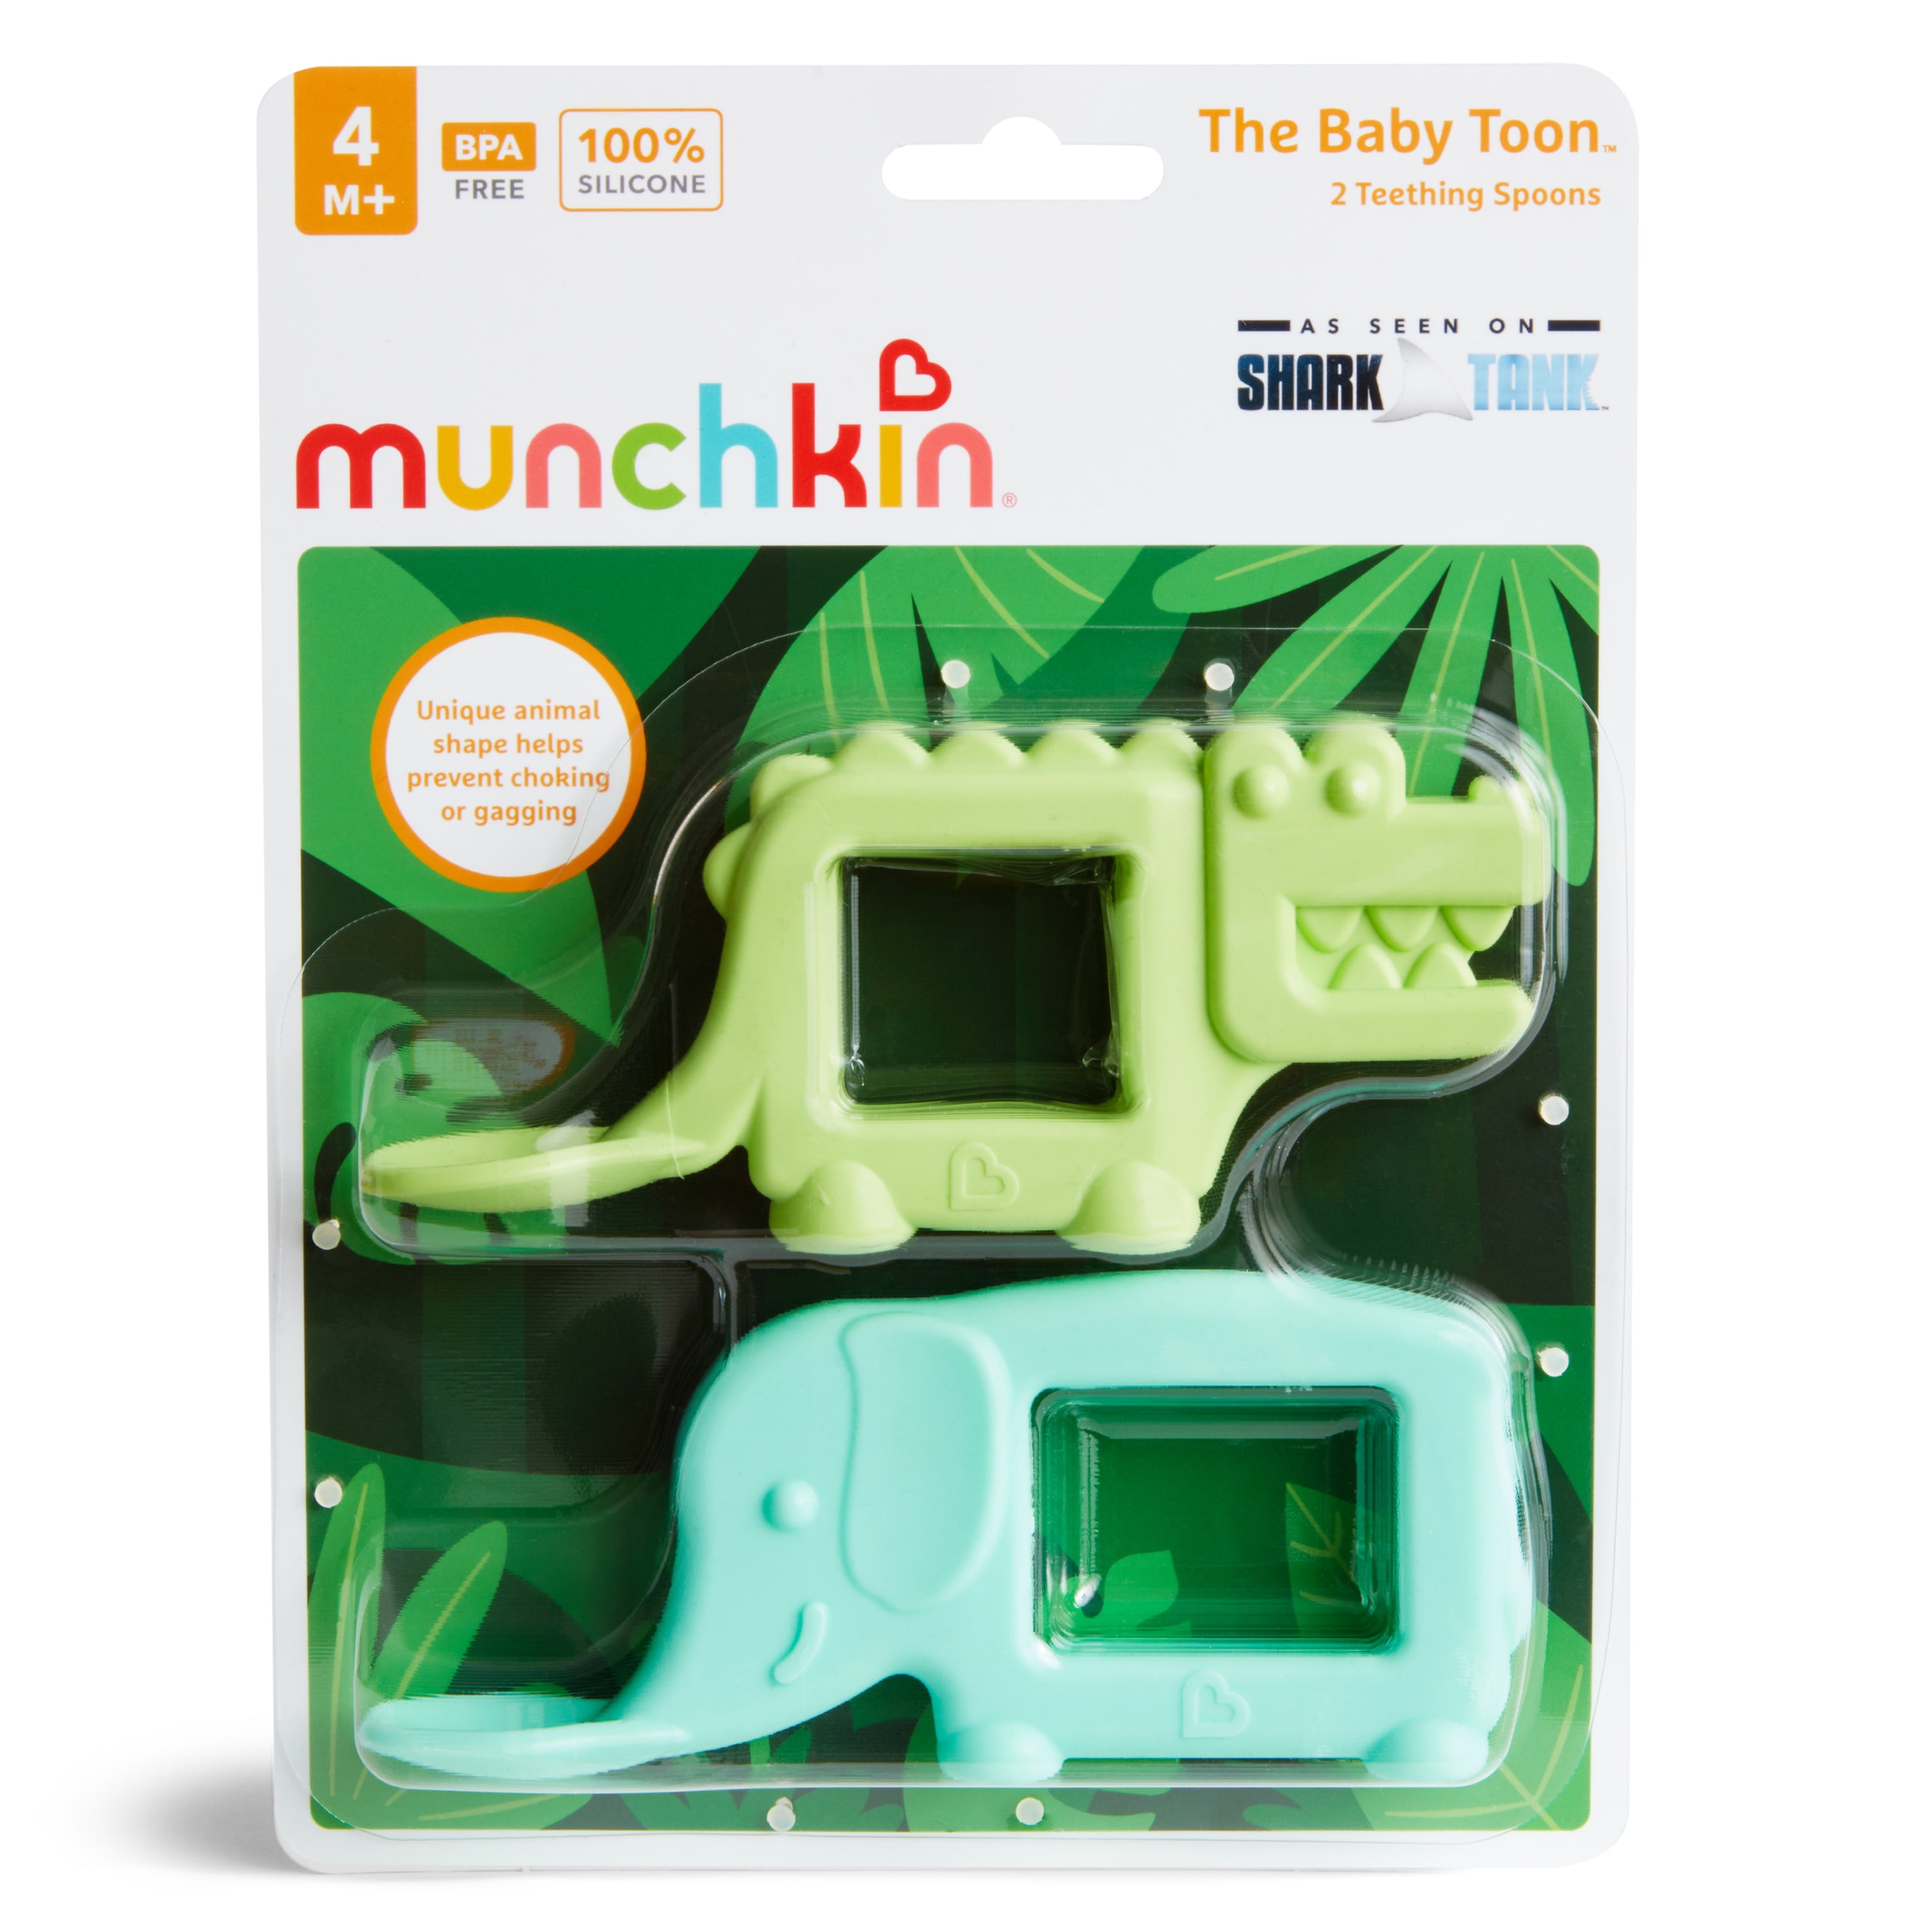 Munchkin The Baby Toon Silicone Teething Spoon for sale online